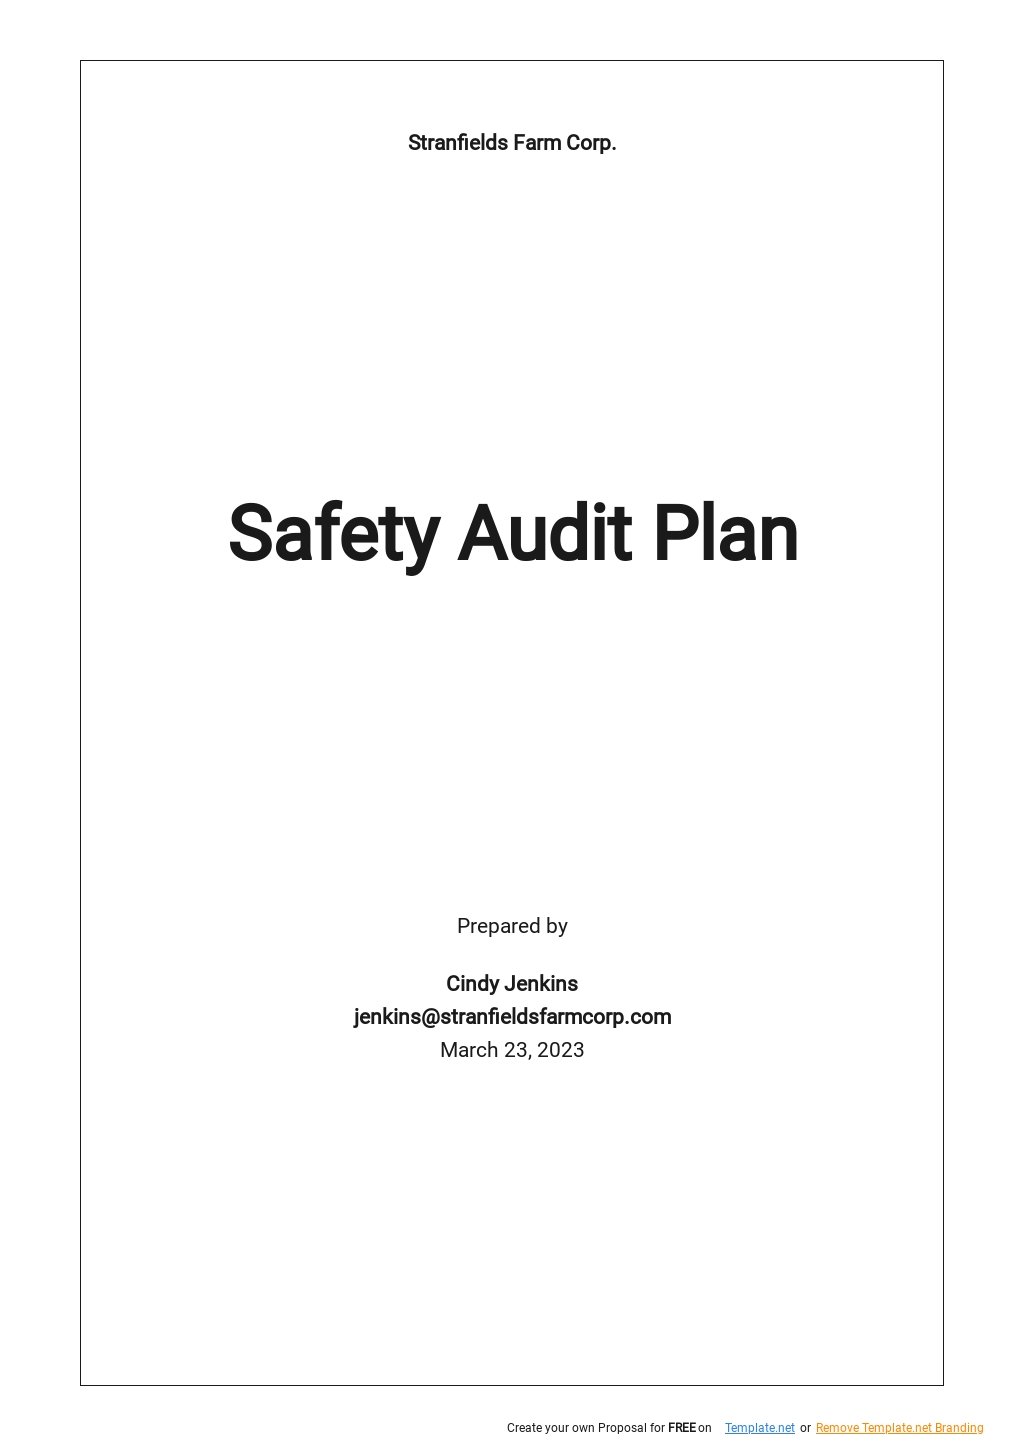 Safety Audit Plan Template